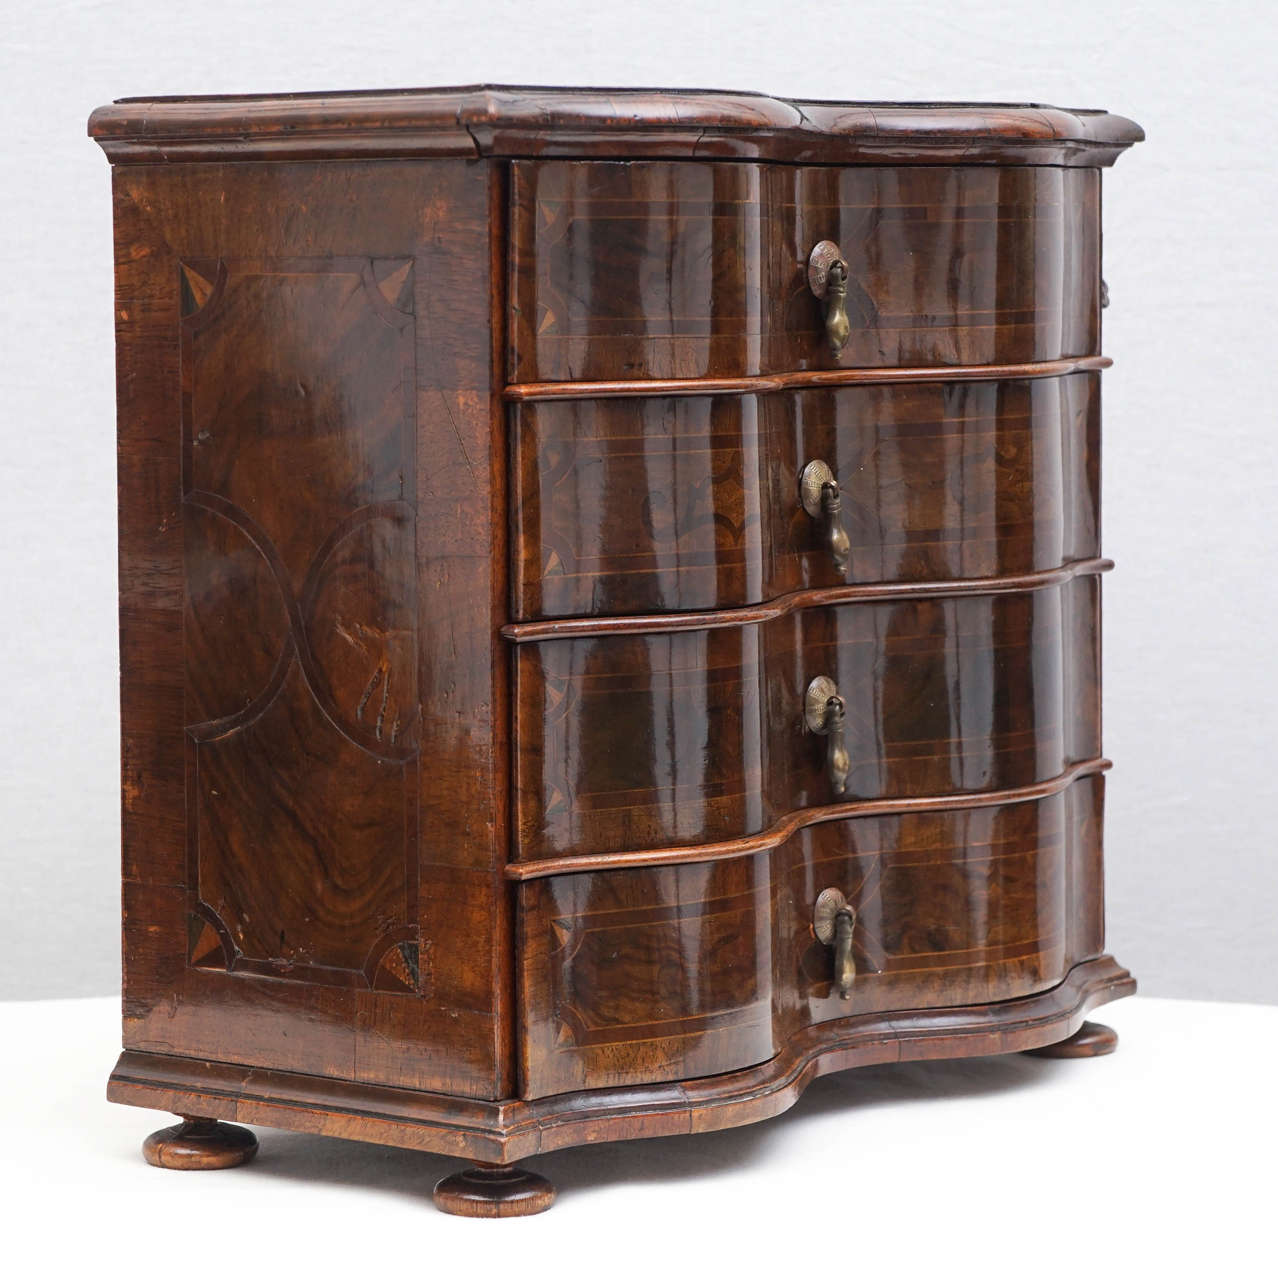 German Rococo-style walnut inlaid miniature serpentine-fronted chest of drawers, with locking device and key. Teardrop metal drawer pulls. Intricate
locking device that secures all the drawers. Interior of all the drawers painted
in precious metal